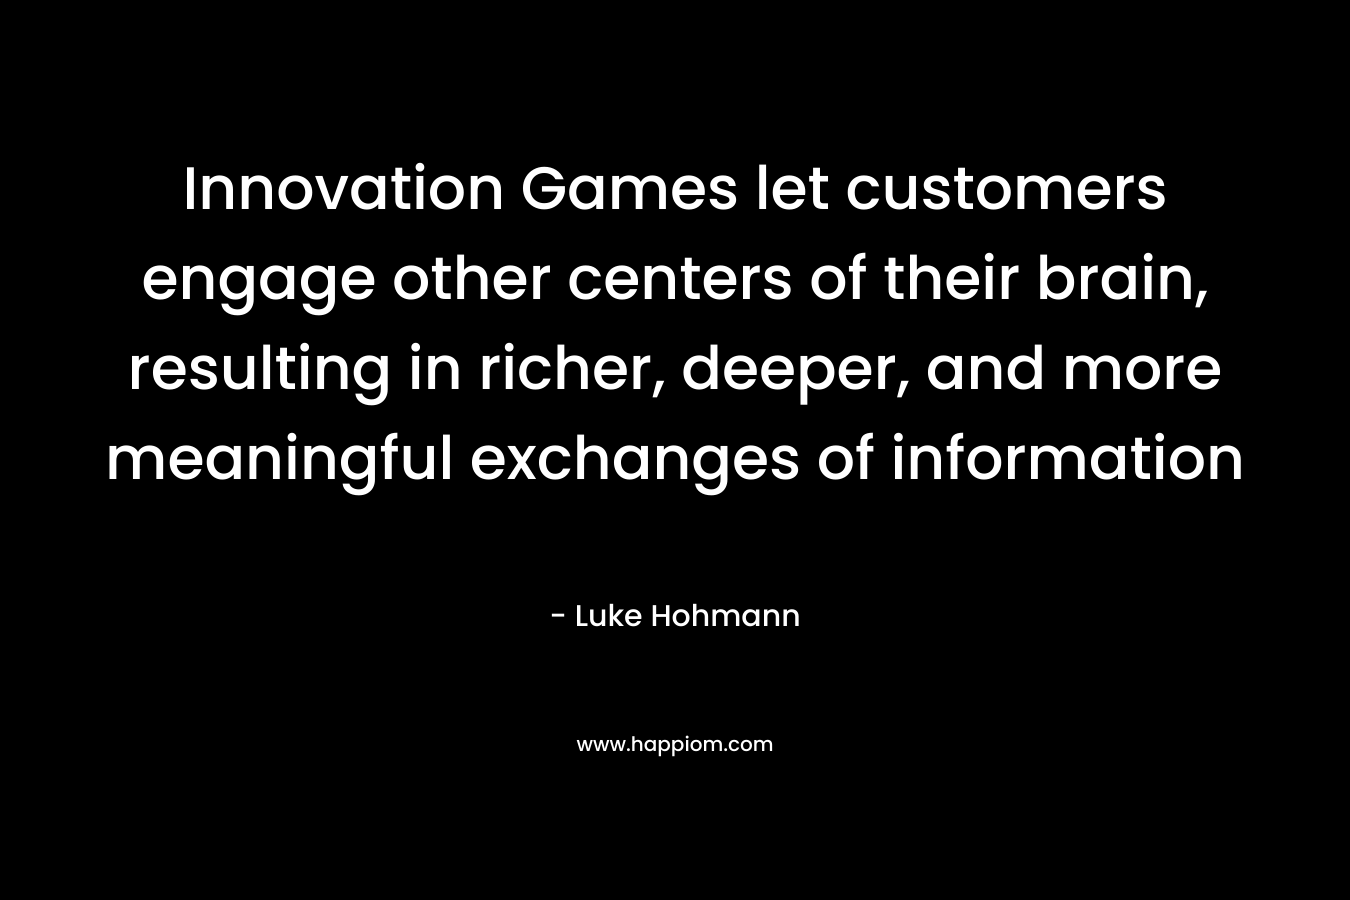 Innovation Games let customers engage other centers of their brain, resulting in richer, deeper, and more meaningful exchanges of information